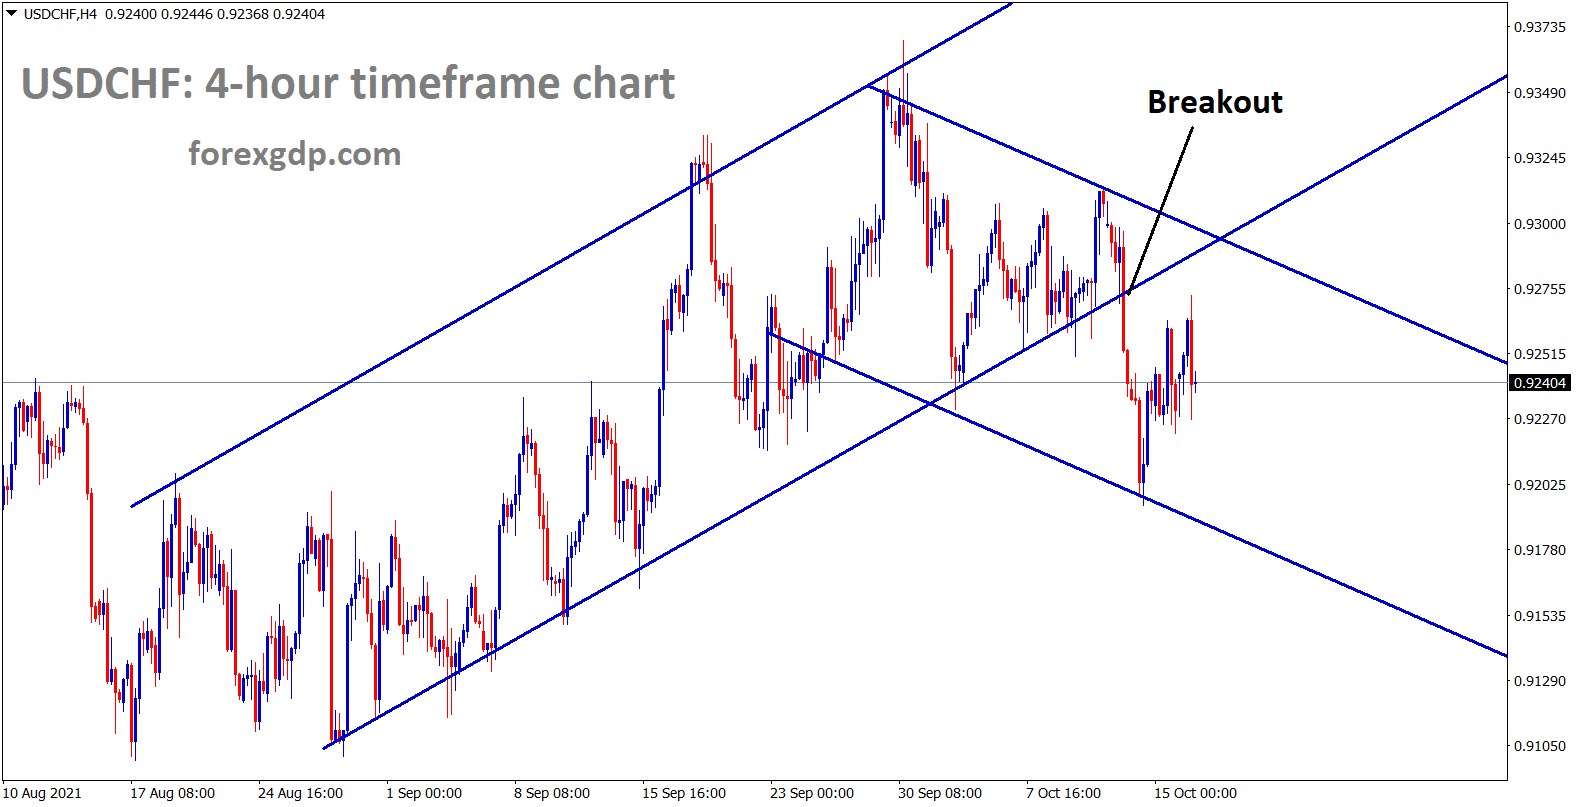 USDCHF is consolidating and trying to retest the previous broken uptrend channel line